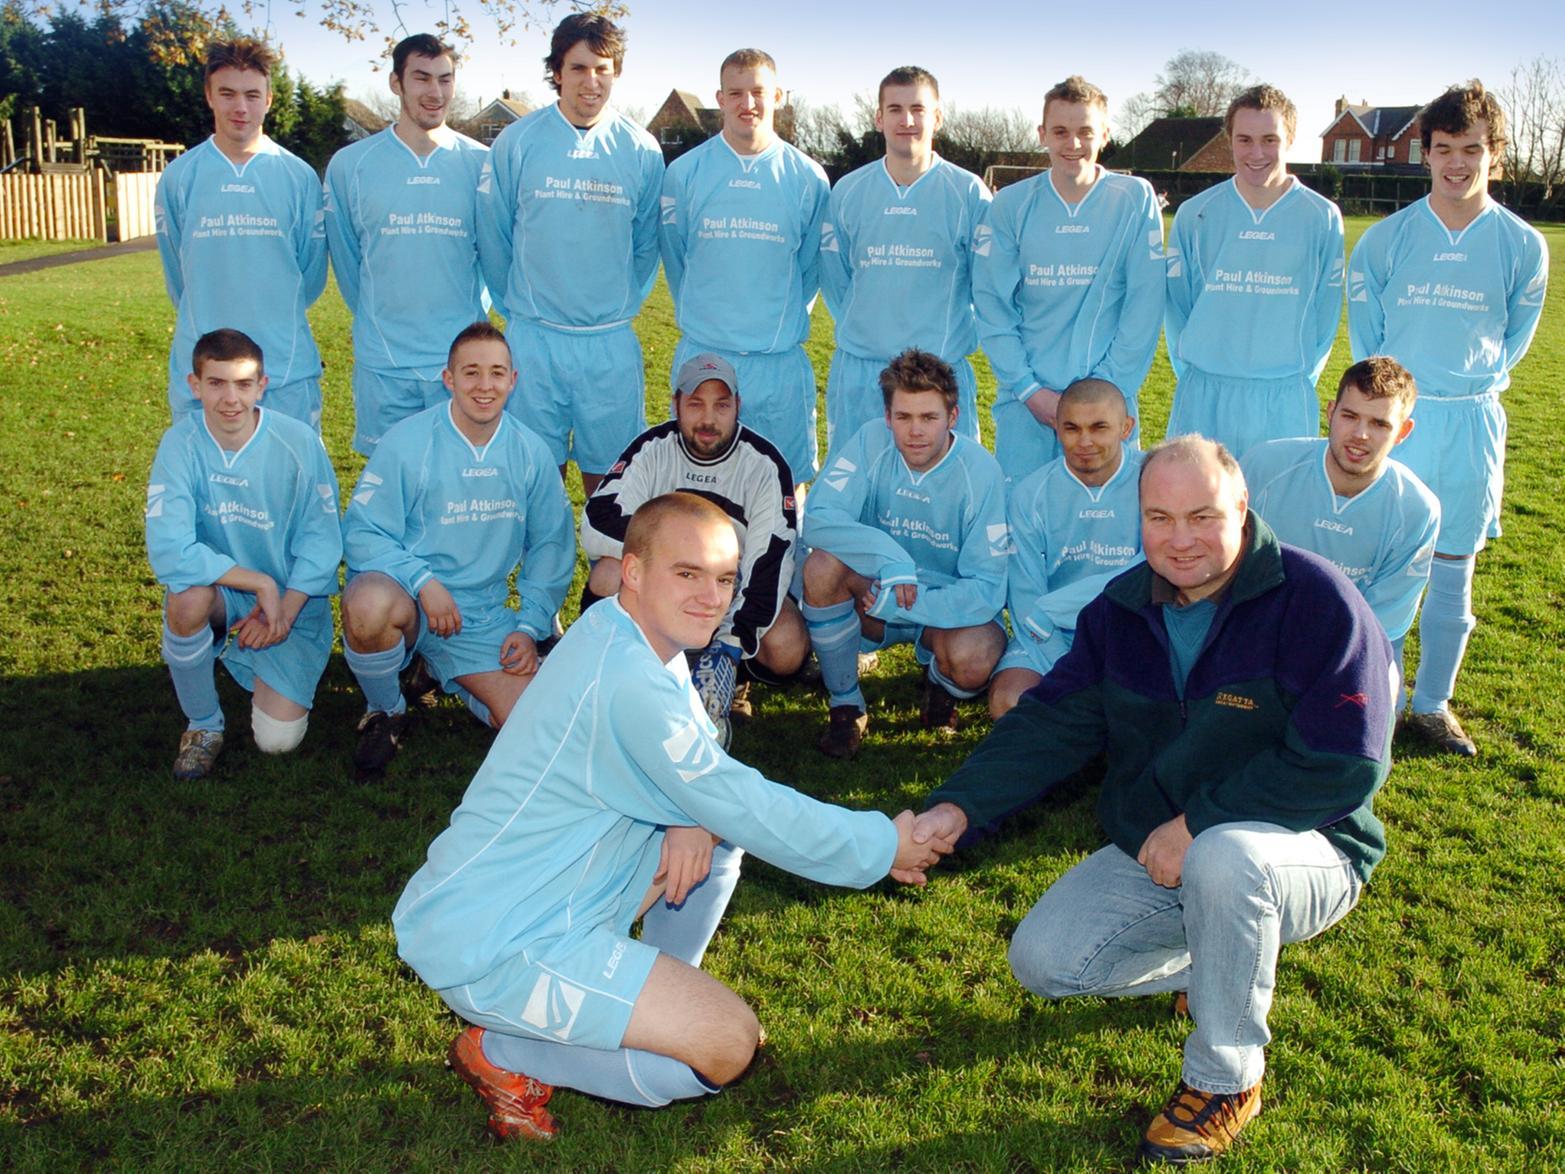 Do you recognise anyone in any of these pictures? Tweet @SN_Sport or email daniel.gregory@jpimedia.co.uk